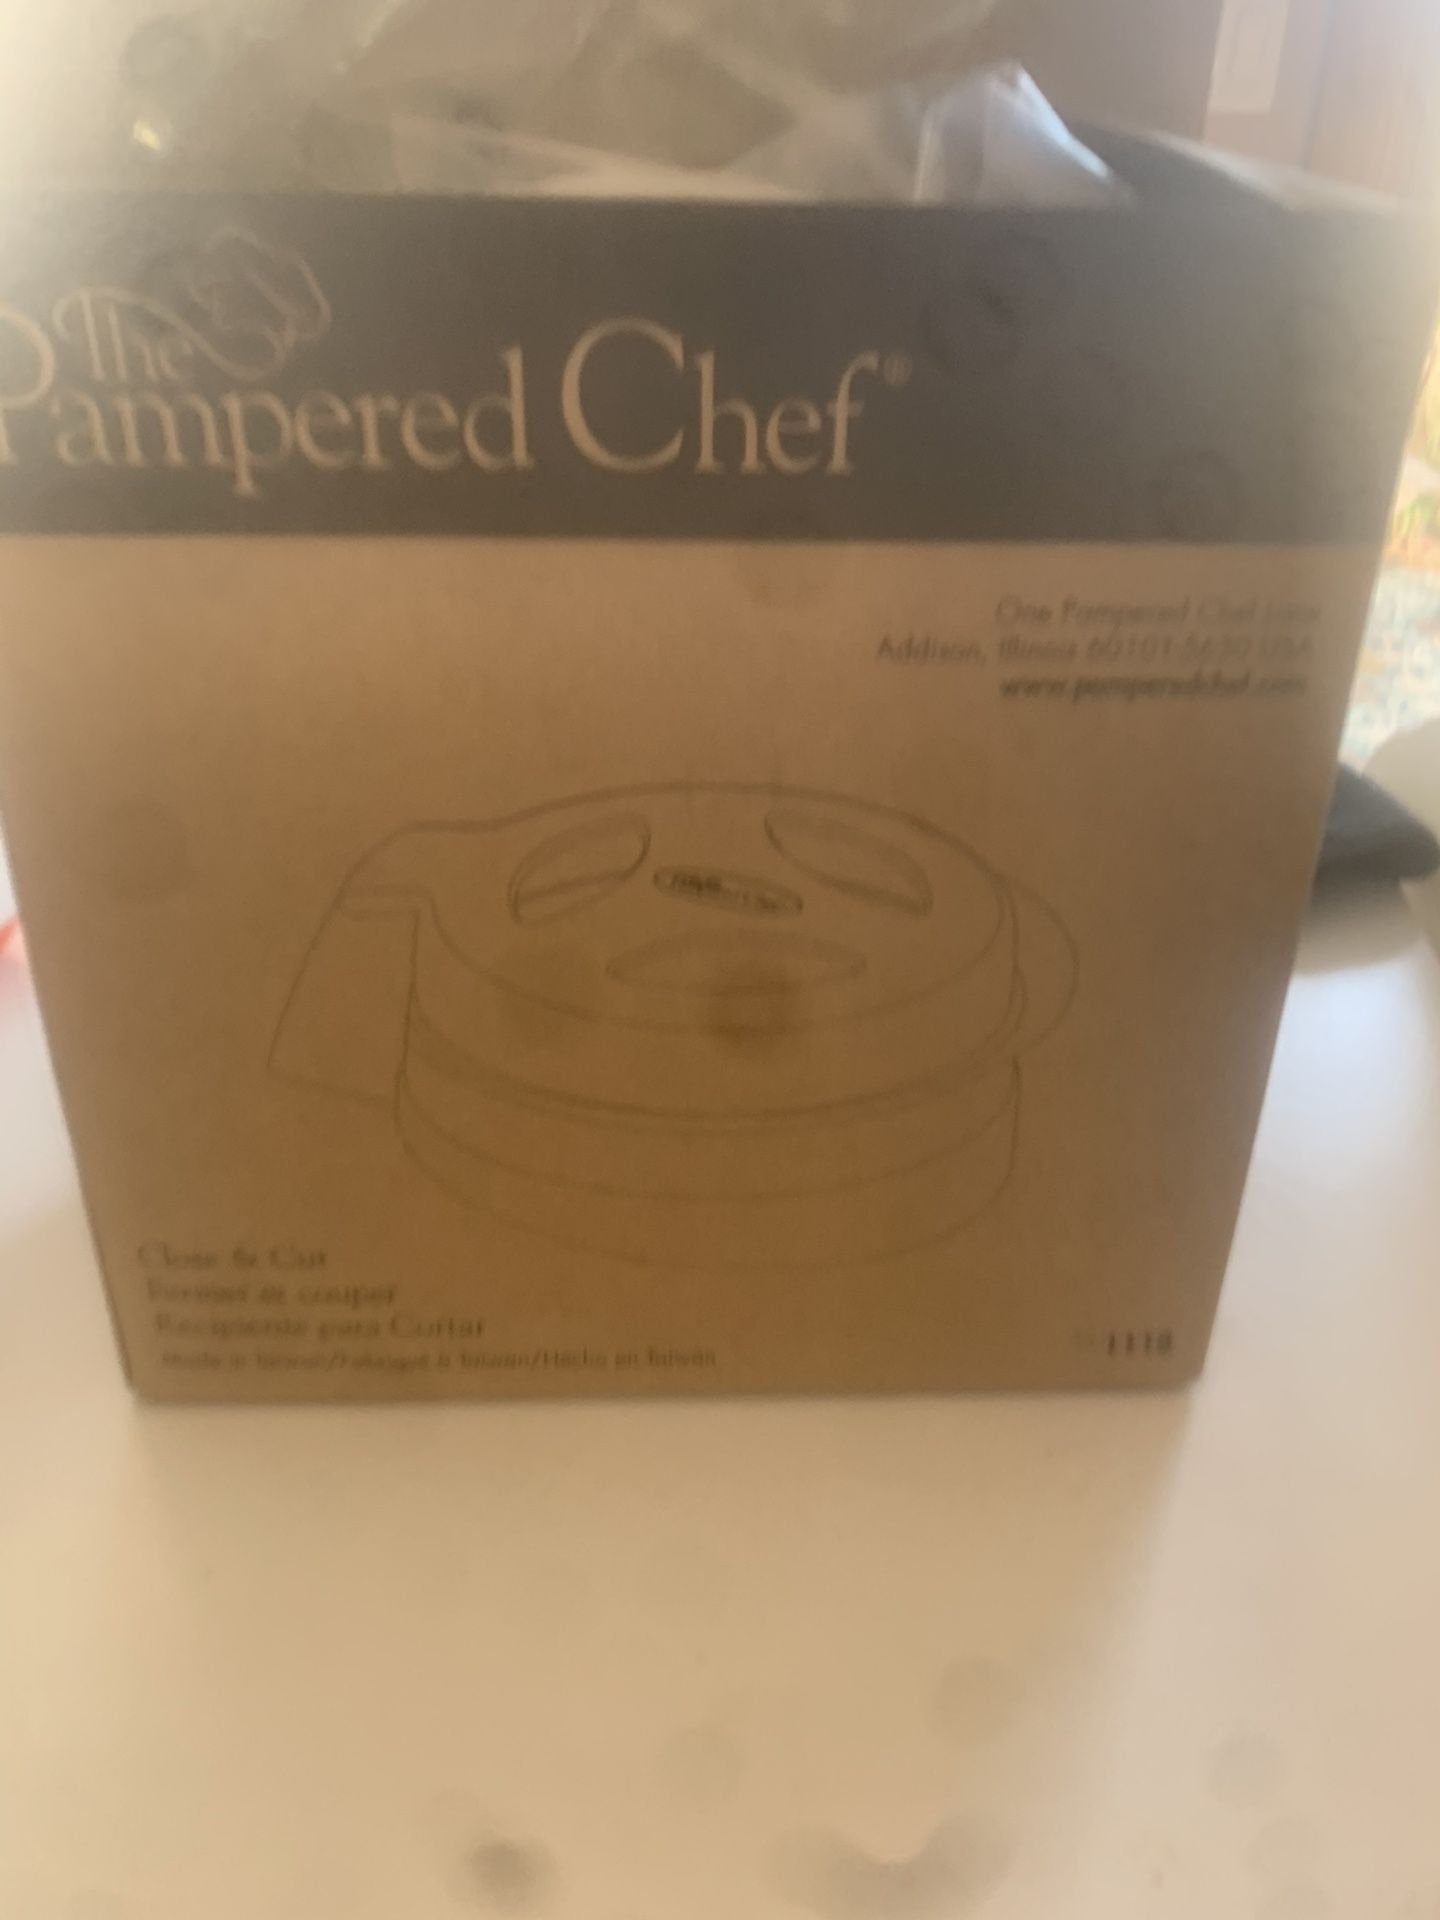 Pampered chef close and cut lid NEW